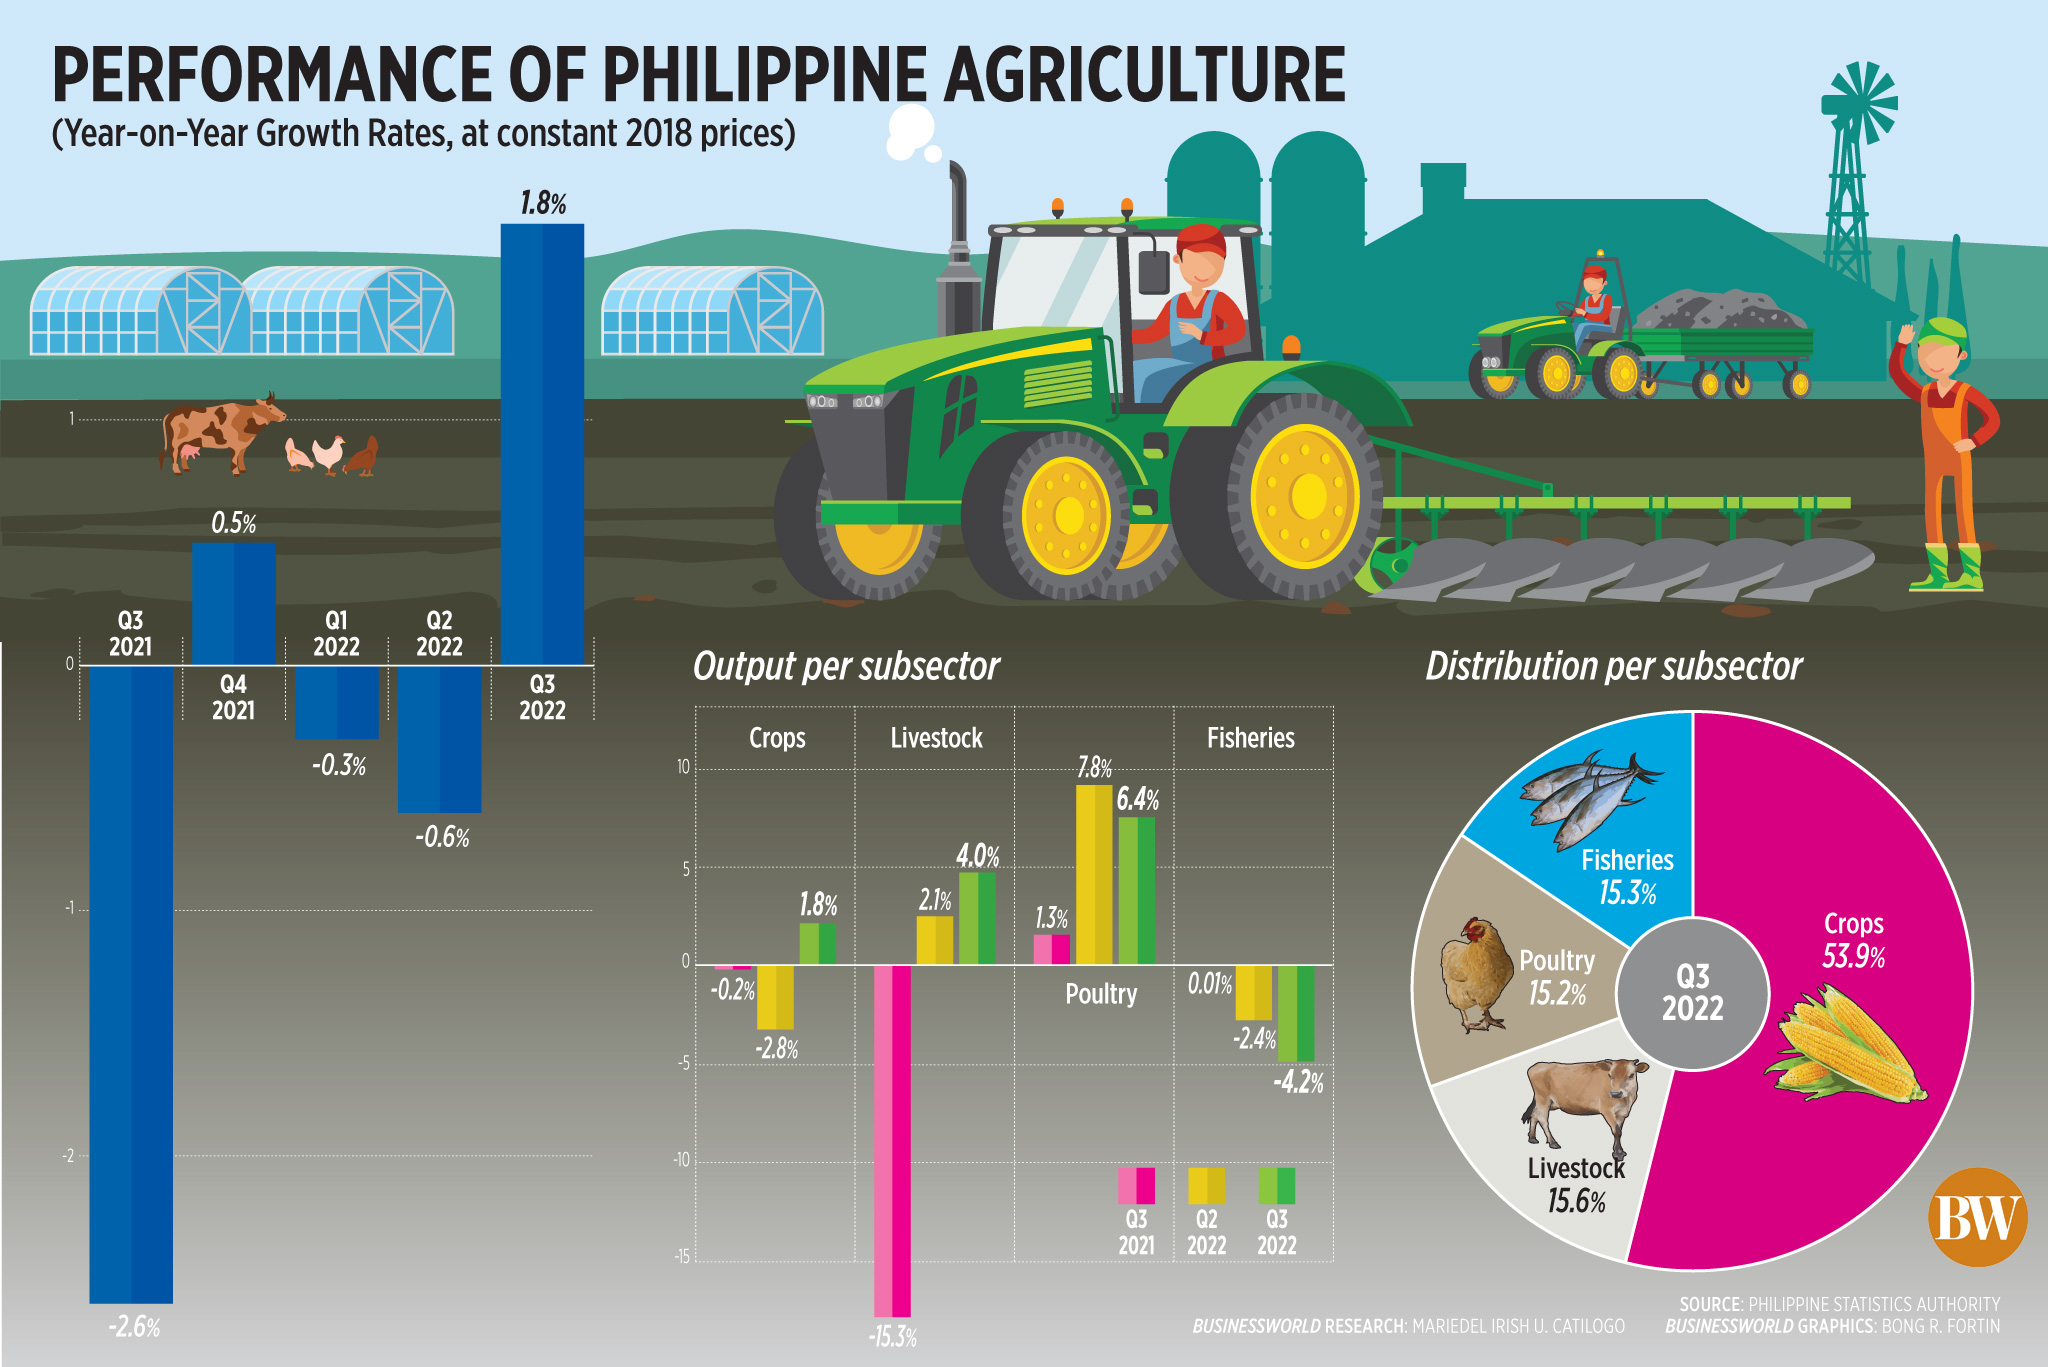 Agricultural production increases in Q3